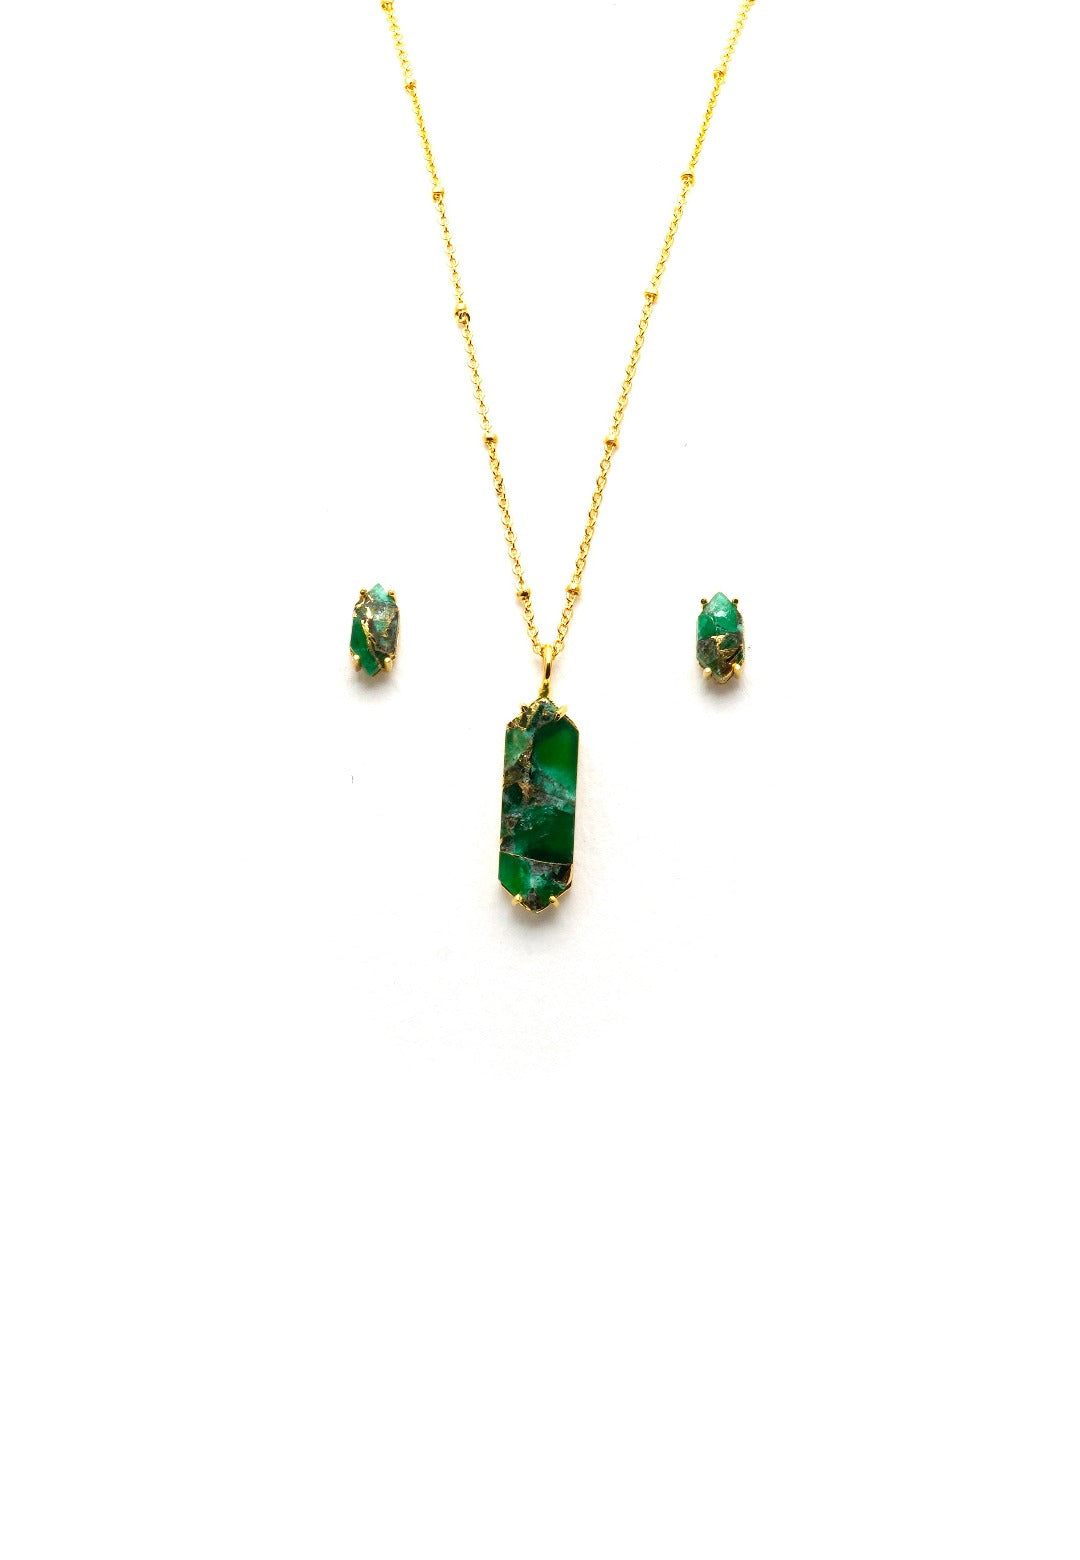 Bullet shaped small green pendant with stud earrings